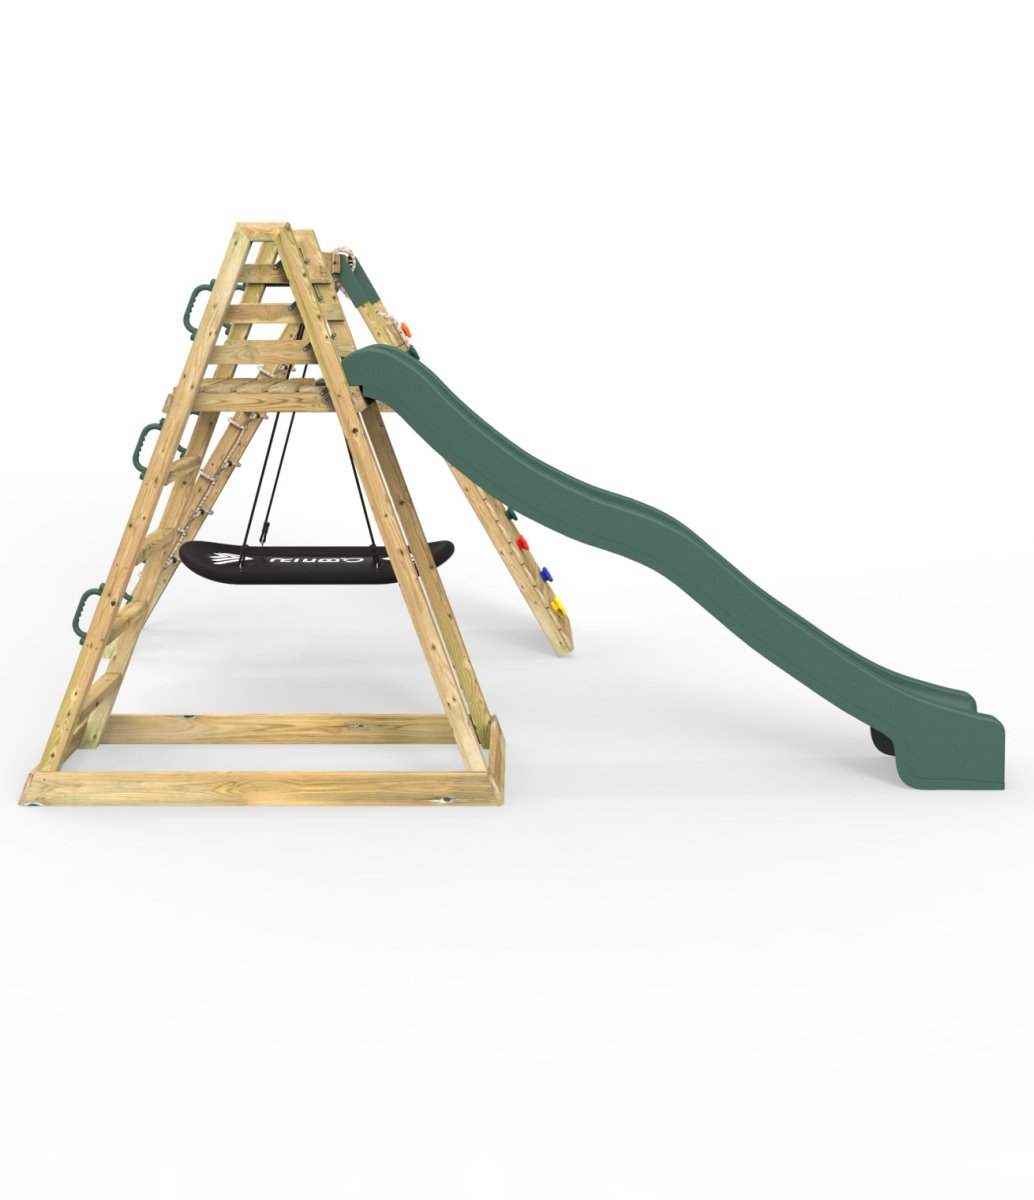 Rebo Wooden Pyramid Climbing Frame with Swings & 10ft Water Slide - Cloudcap